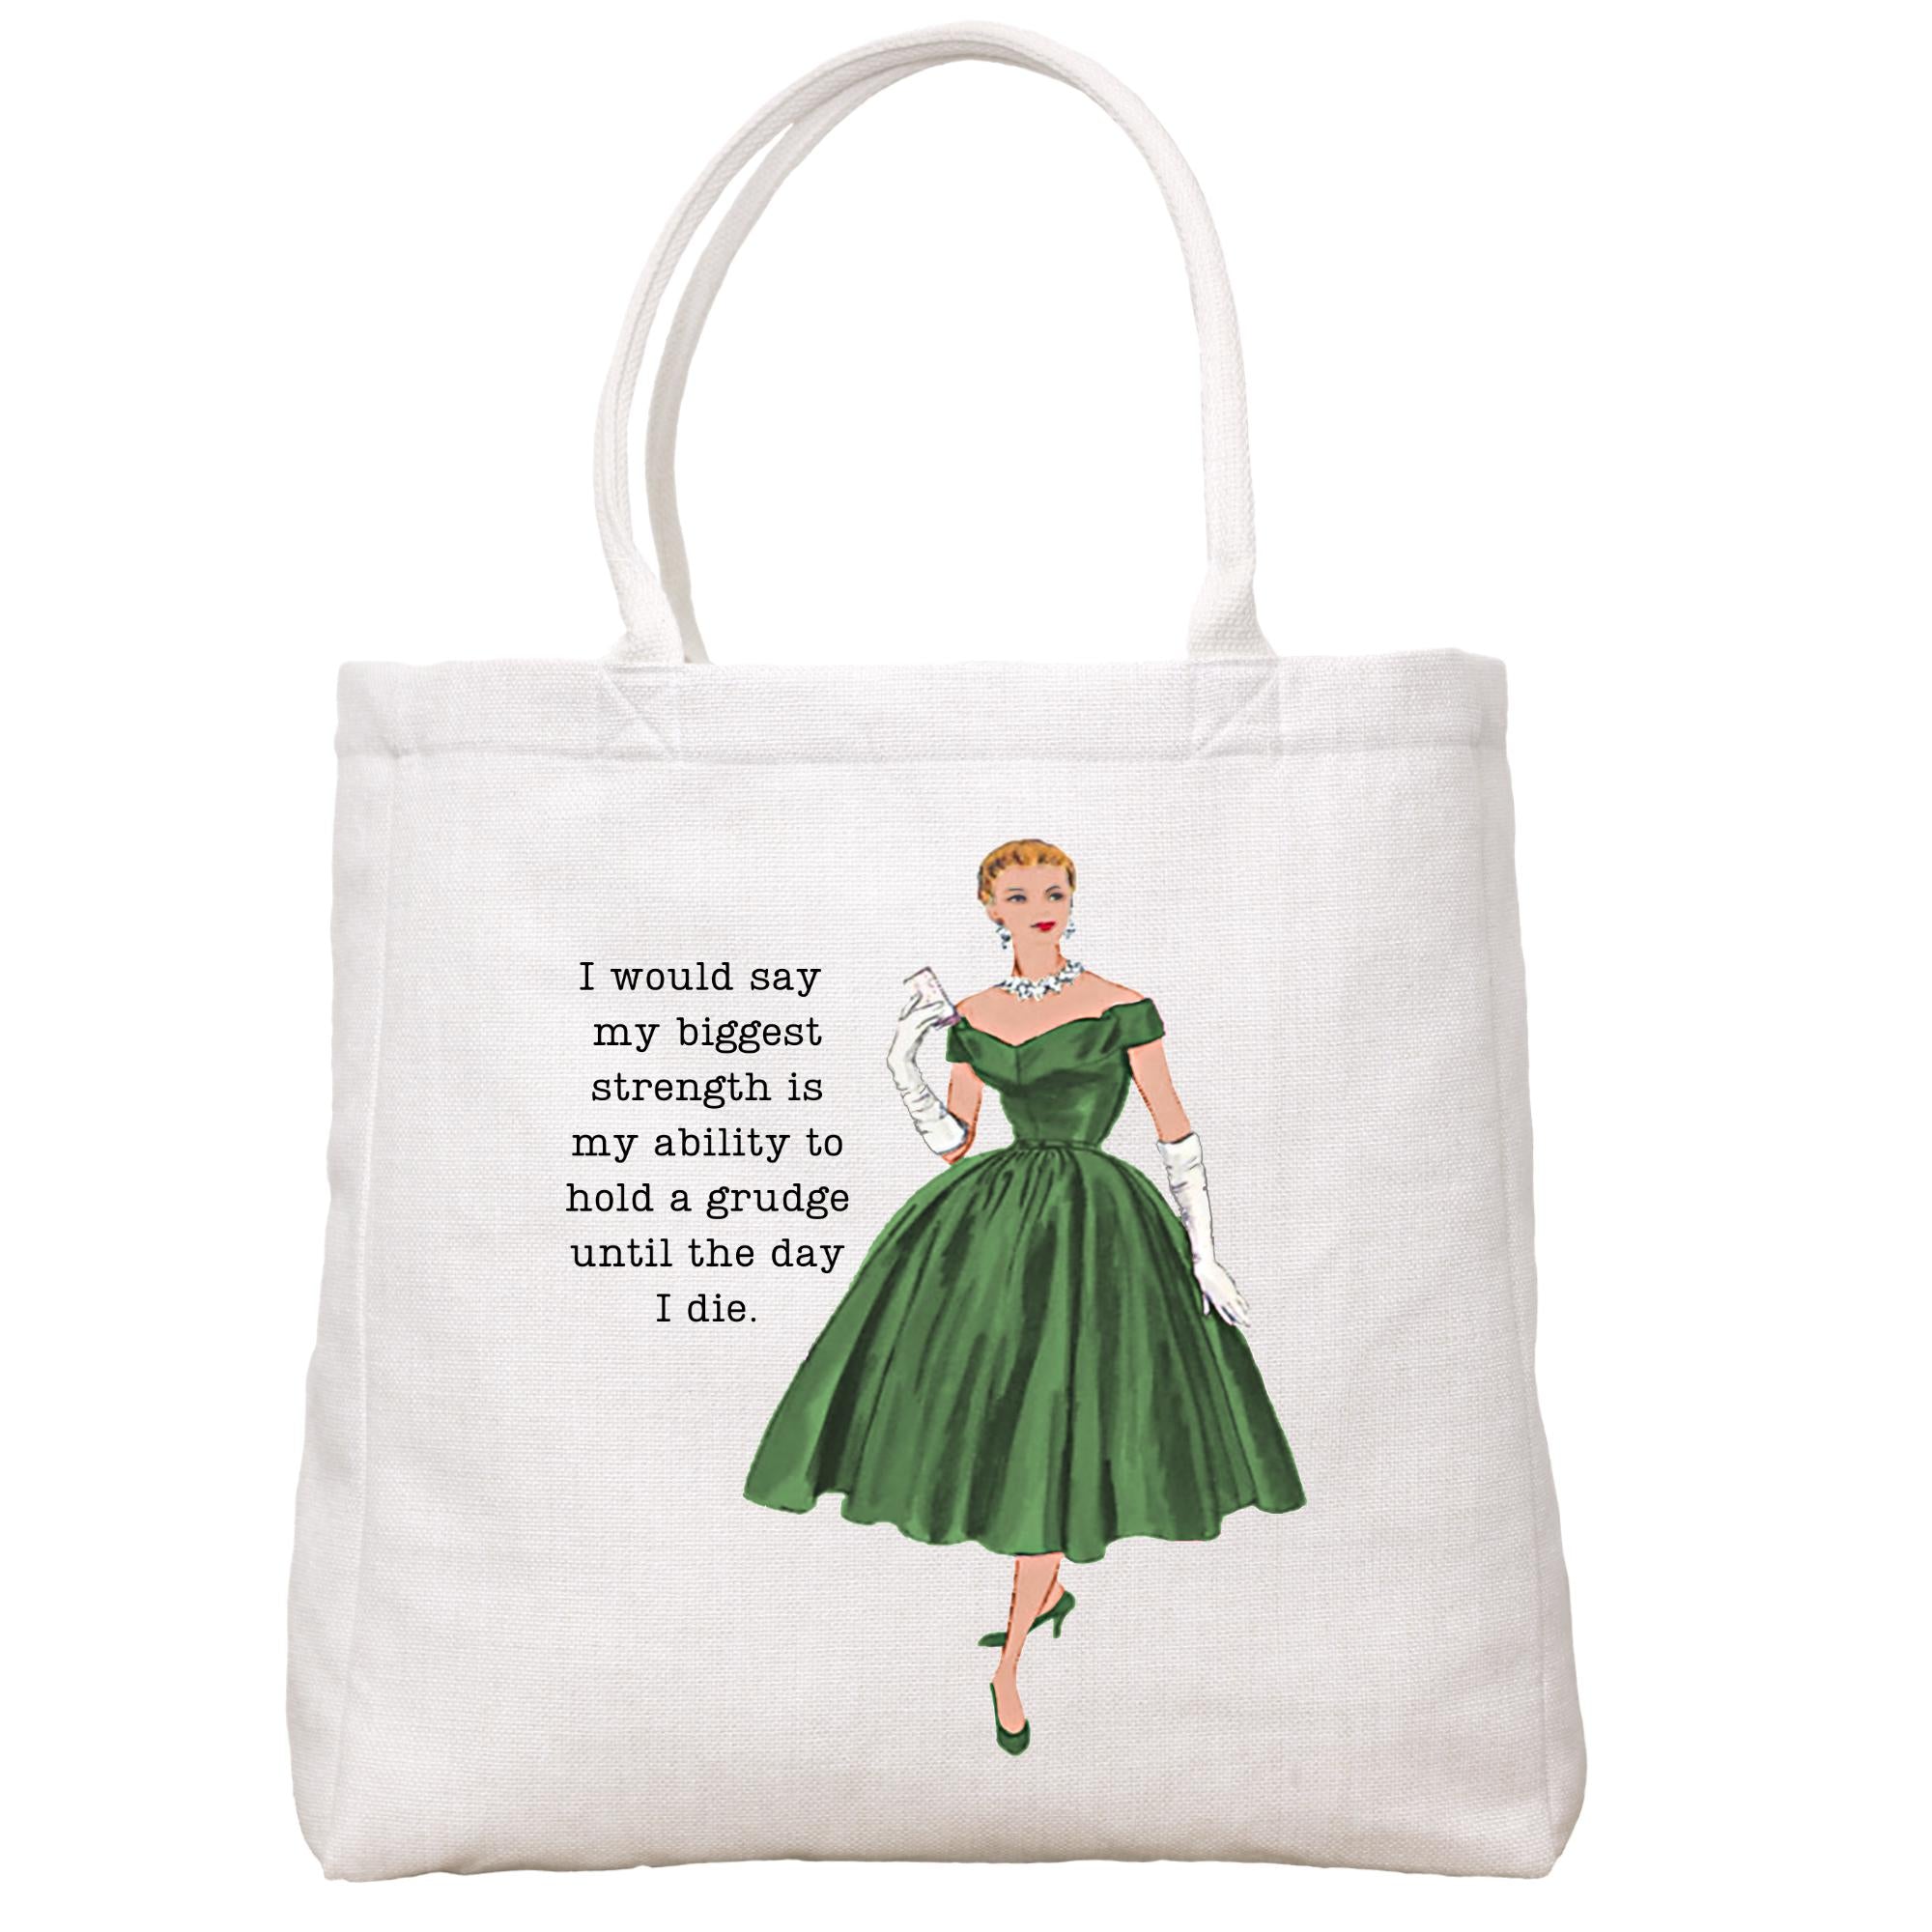 Hold A Grudge Tote Bag Tote Bag - Southern Sisters